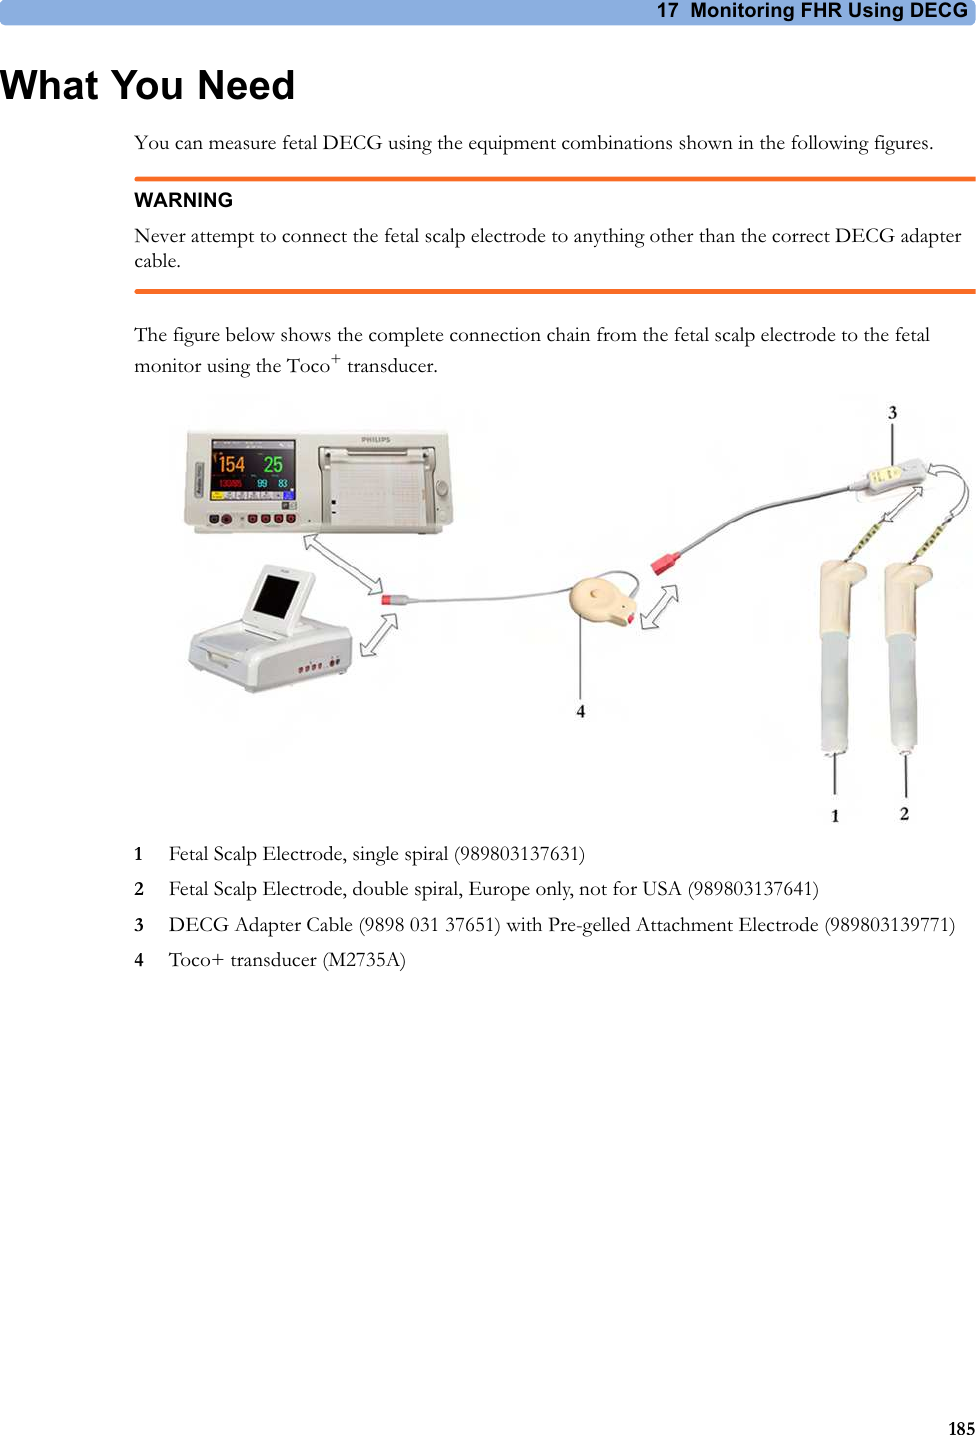 17  Monitoring FHR Using DECG185What You NeedYou can measure fetal DECG using the equipment combinations shown in the following figures.WARNINGNever attempt to connect the fetal scalp electrode to anything other than the correct DECG adapter cable.The figure below shows the complete connection chain from the fetal scalp electrode to the fetal monitor using the Toco+ transducer.1Fetal Scalp Electrode, single spiral (989803137631)2Fetal Scalp Electrode, double spiral, Europe only, not for USA (989803137641)3DECG Adapter Cable (9898 031 37651) with Pre-gelled Attachment Electrode (989803139771)4Toco+ transducer (M2735A)